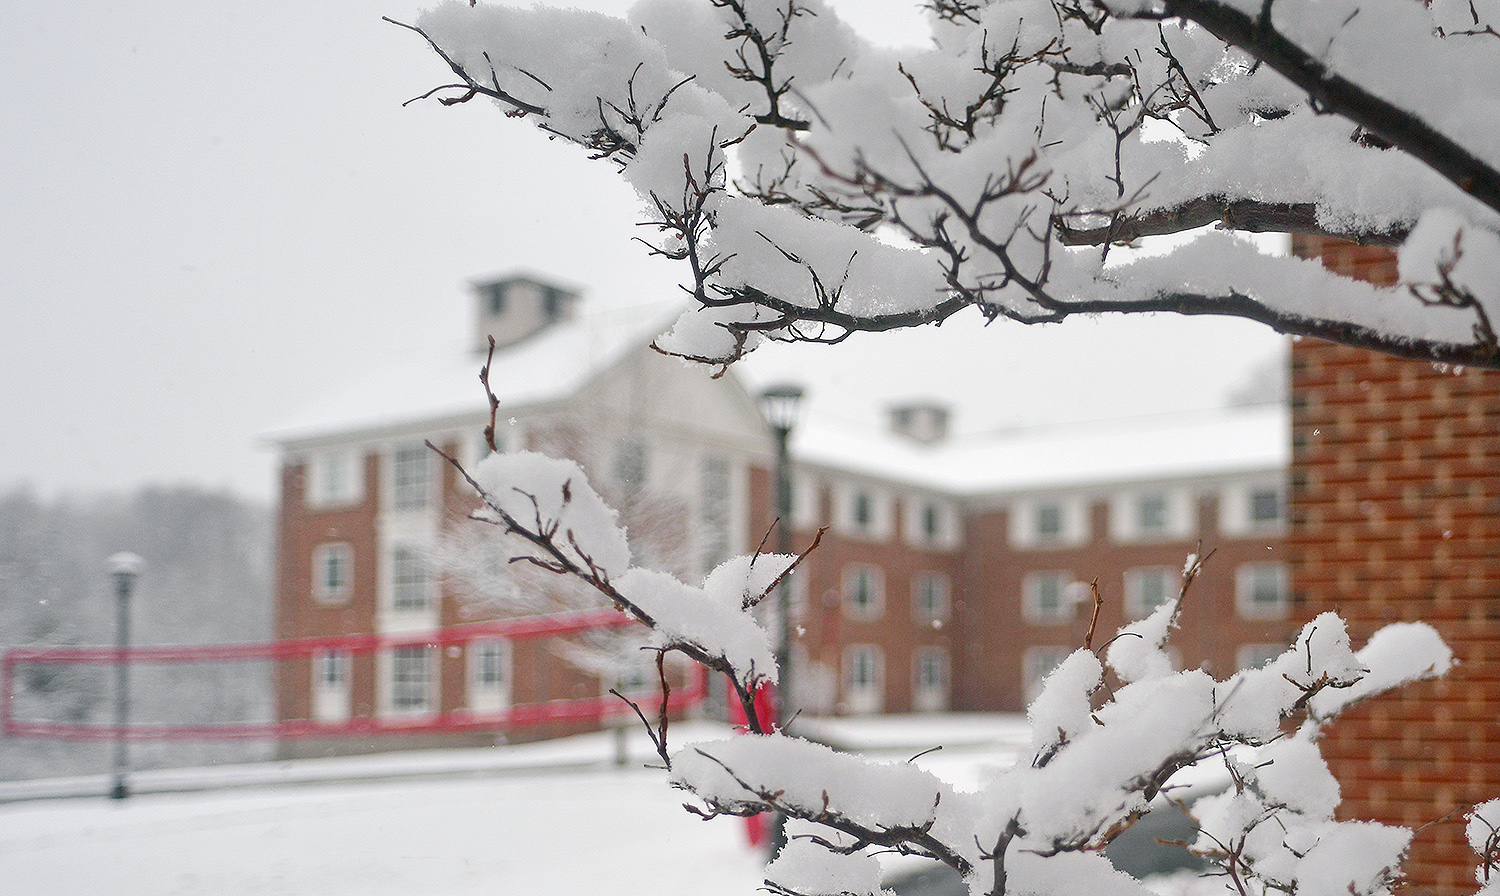 Snowy branches near the Bennet Hall residences.